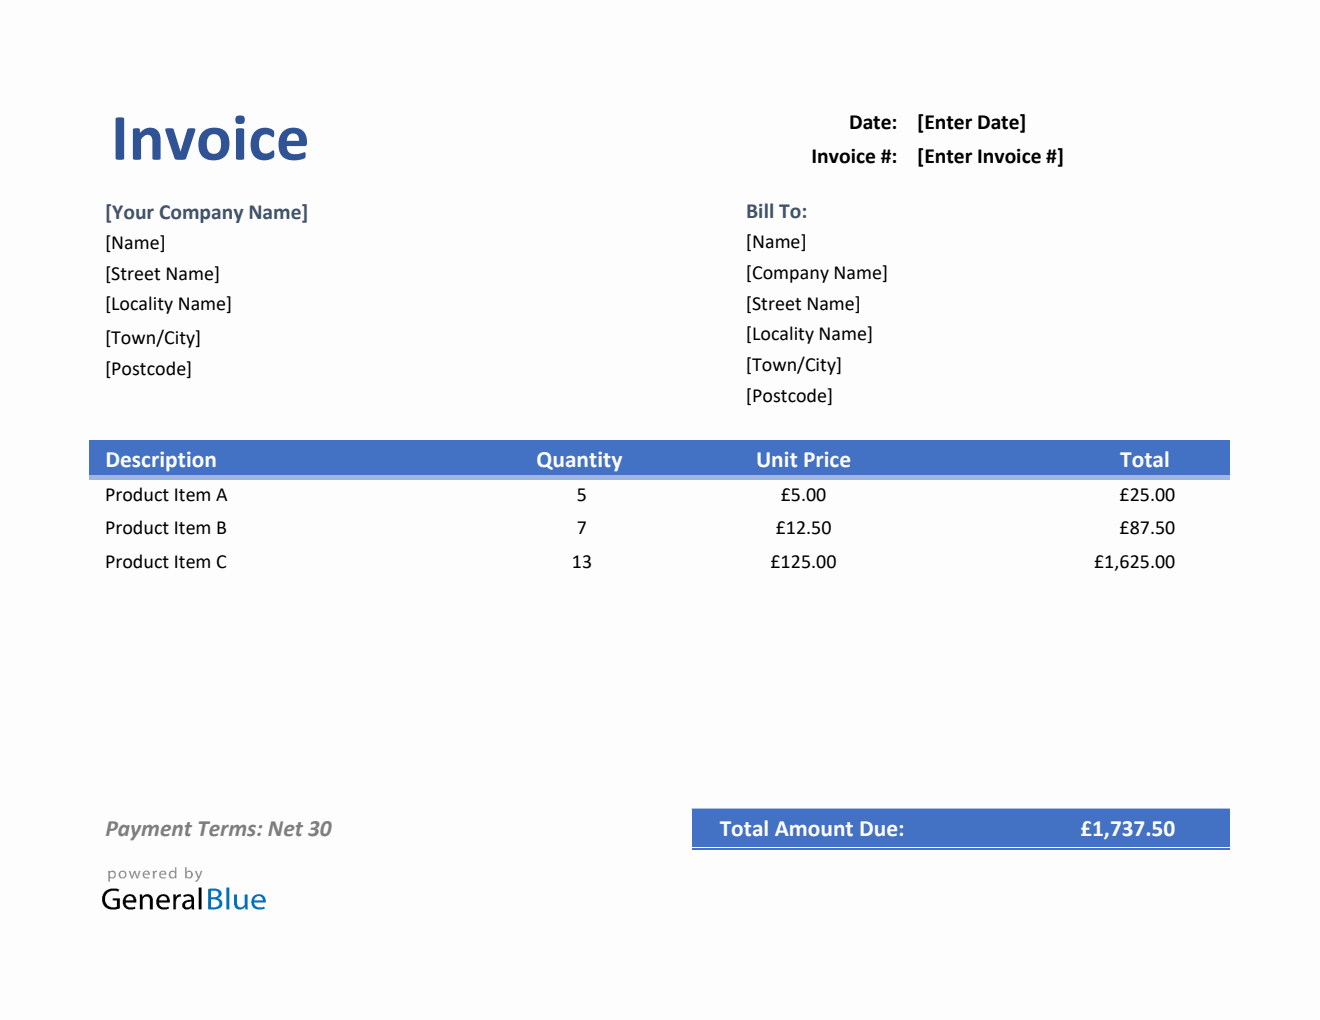 Invoice Template for U.K. in Excel (Blue)